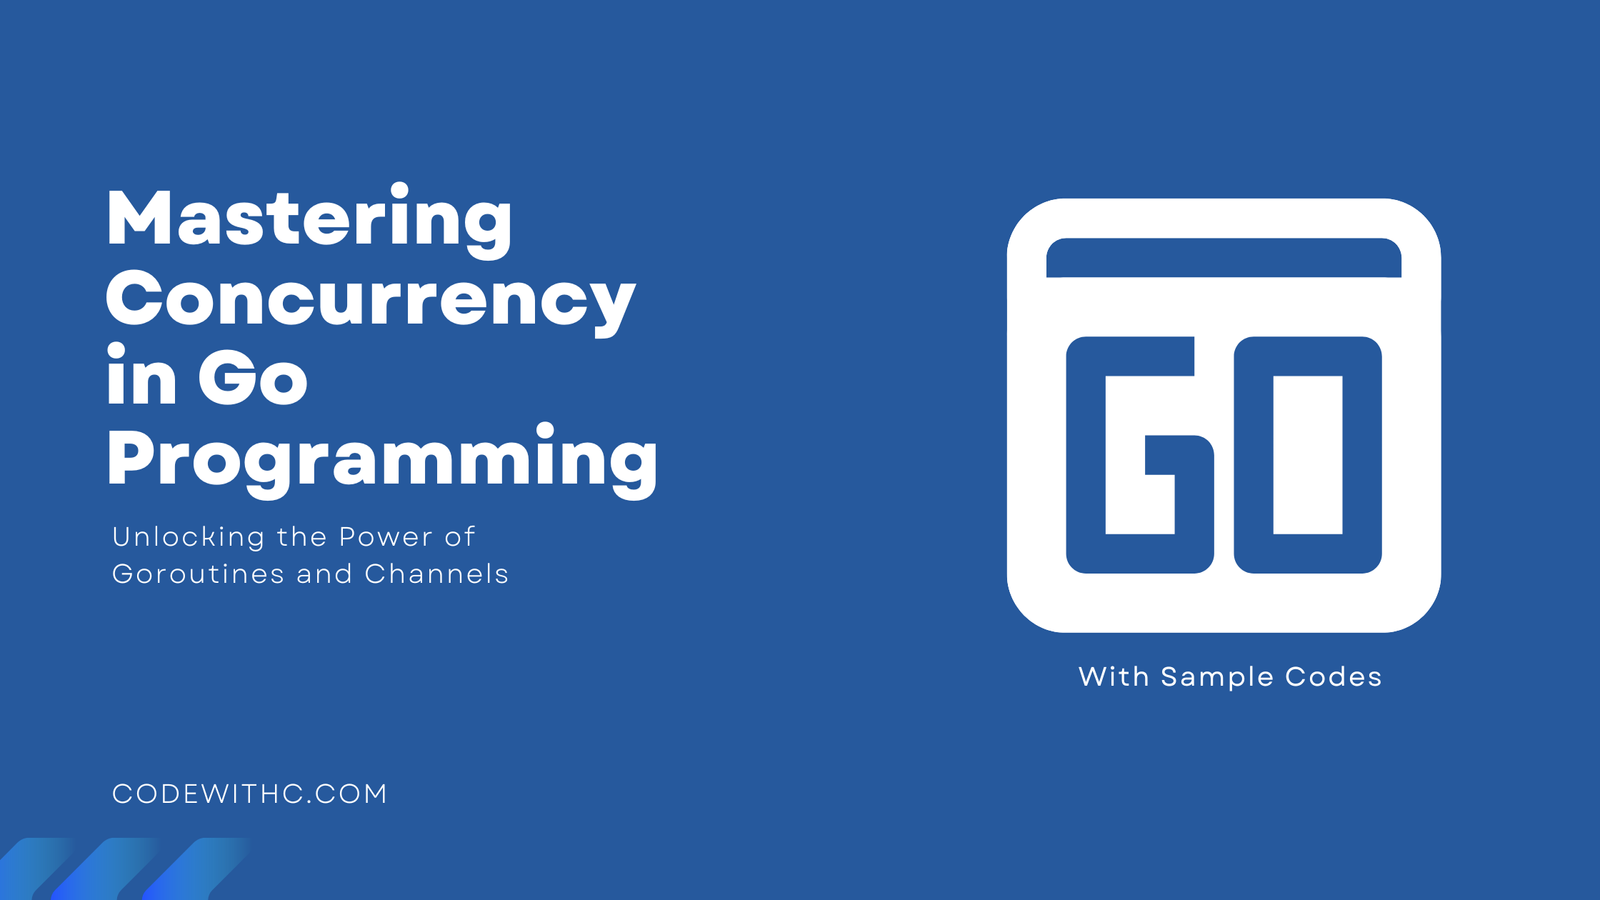 Mastering Concurrency in Go Programming: Unlocking the Power of Goroutines and Channels